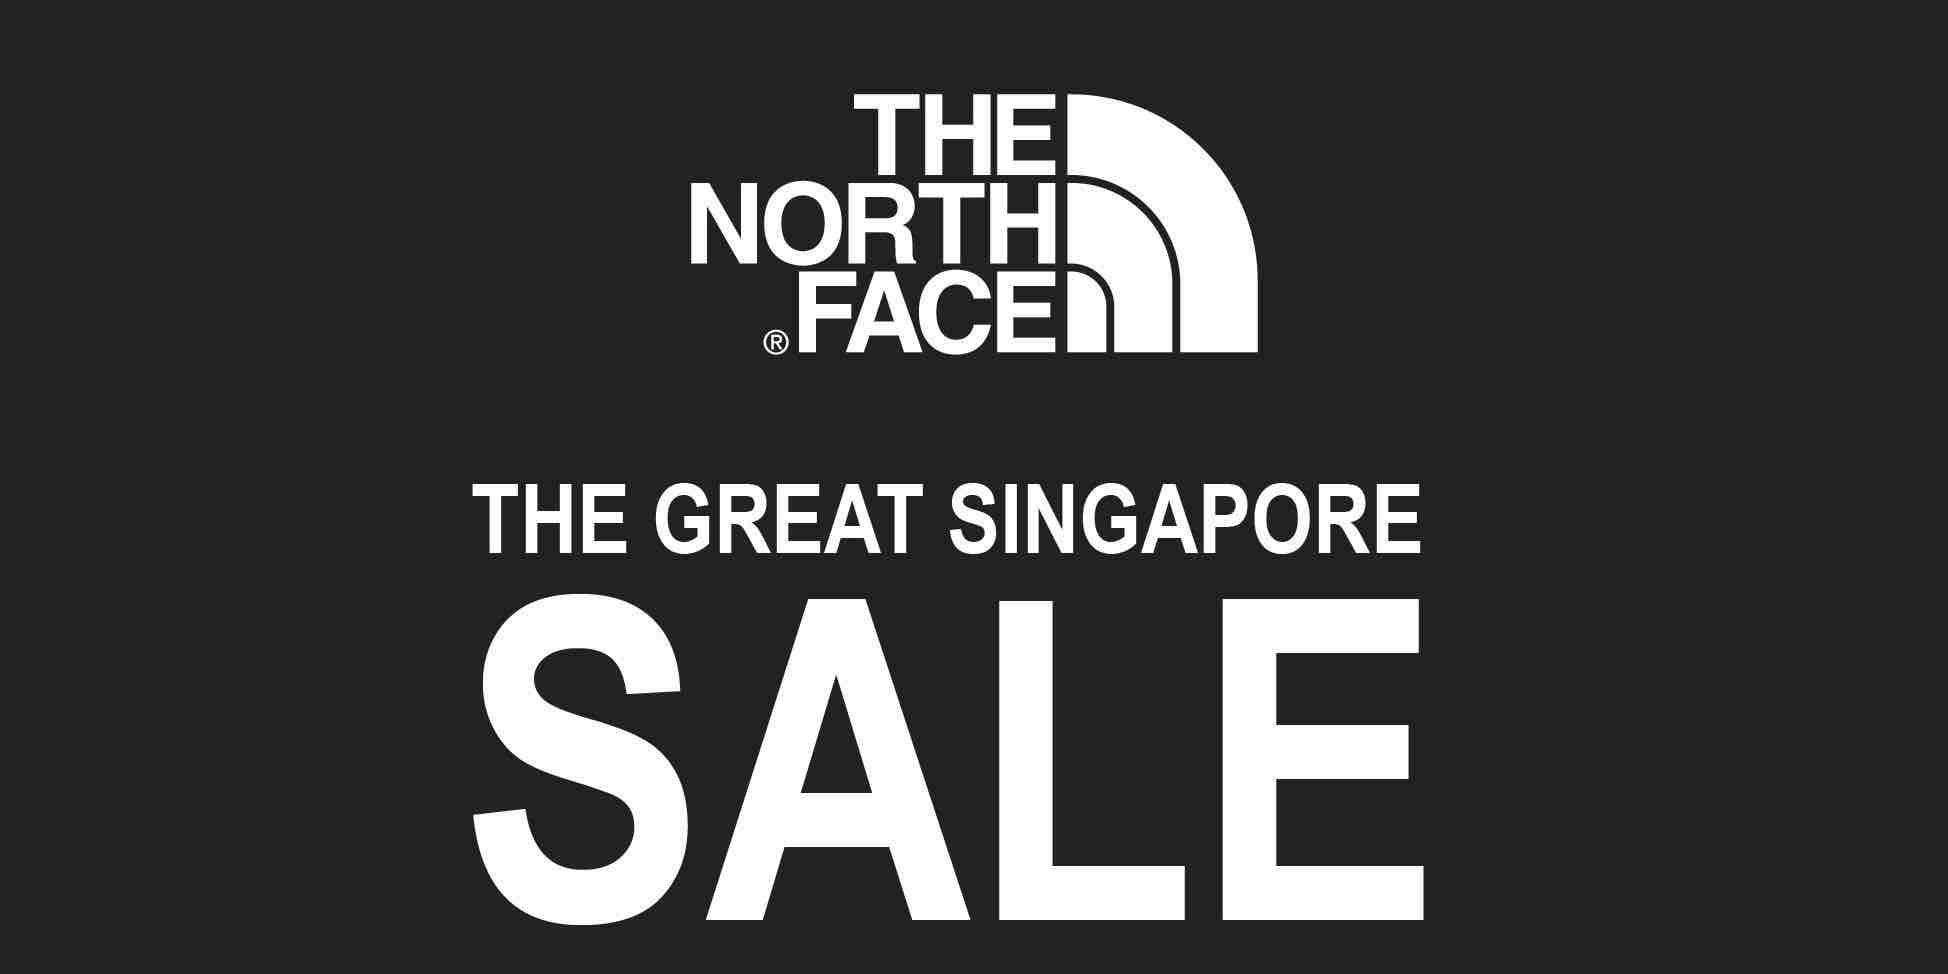 North Face Great Singapore Sale at ION Up to 40% Off Promotion ends 4 Jun 2017